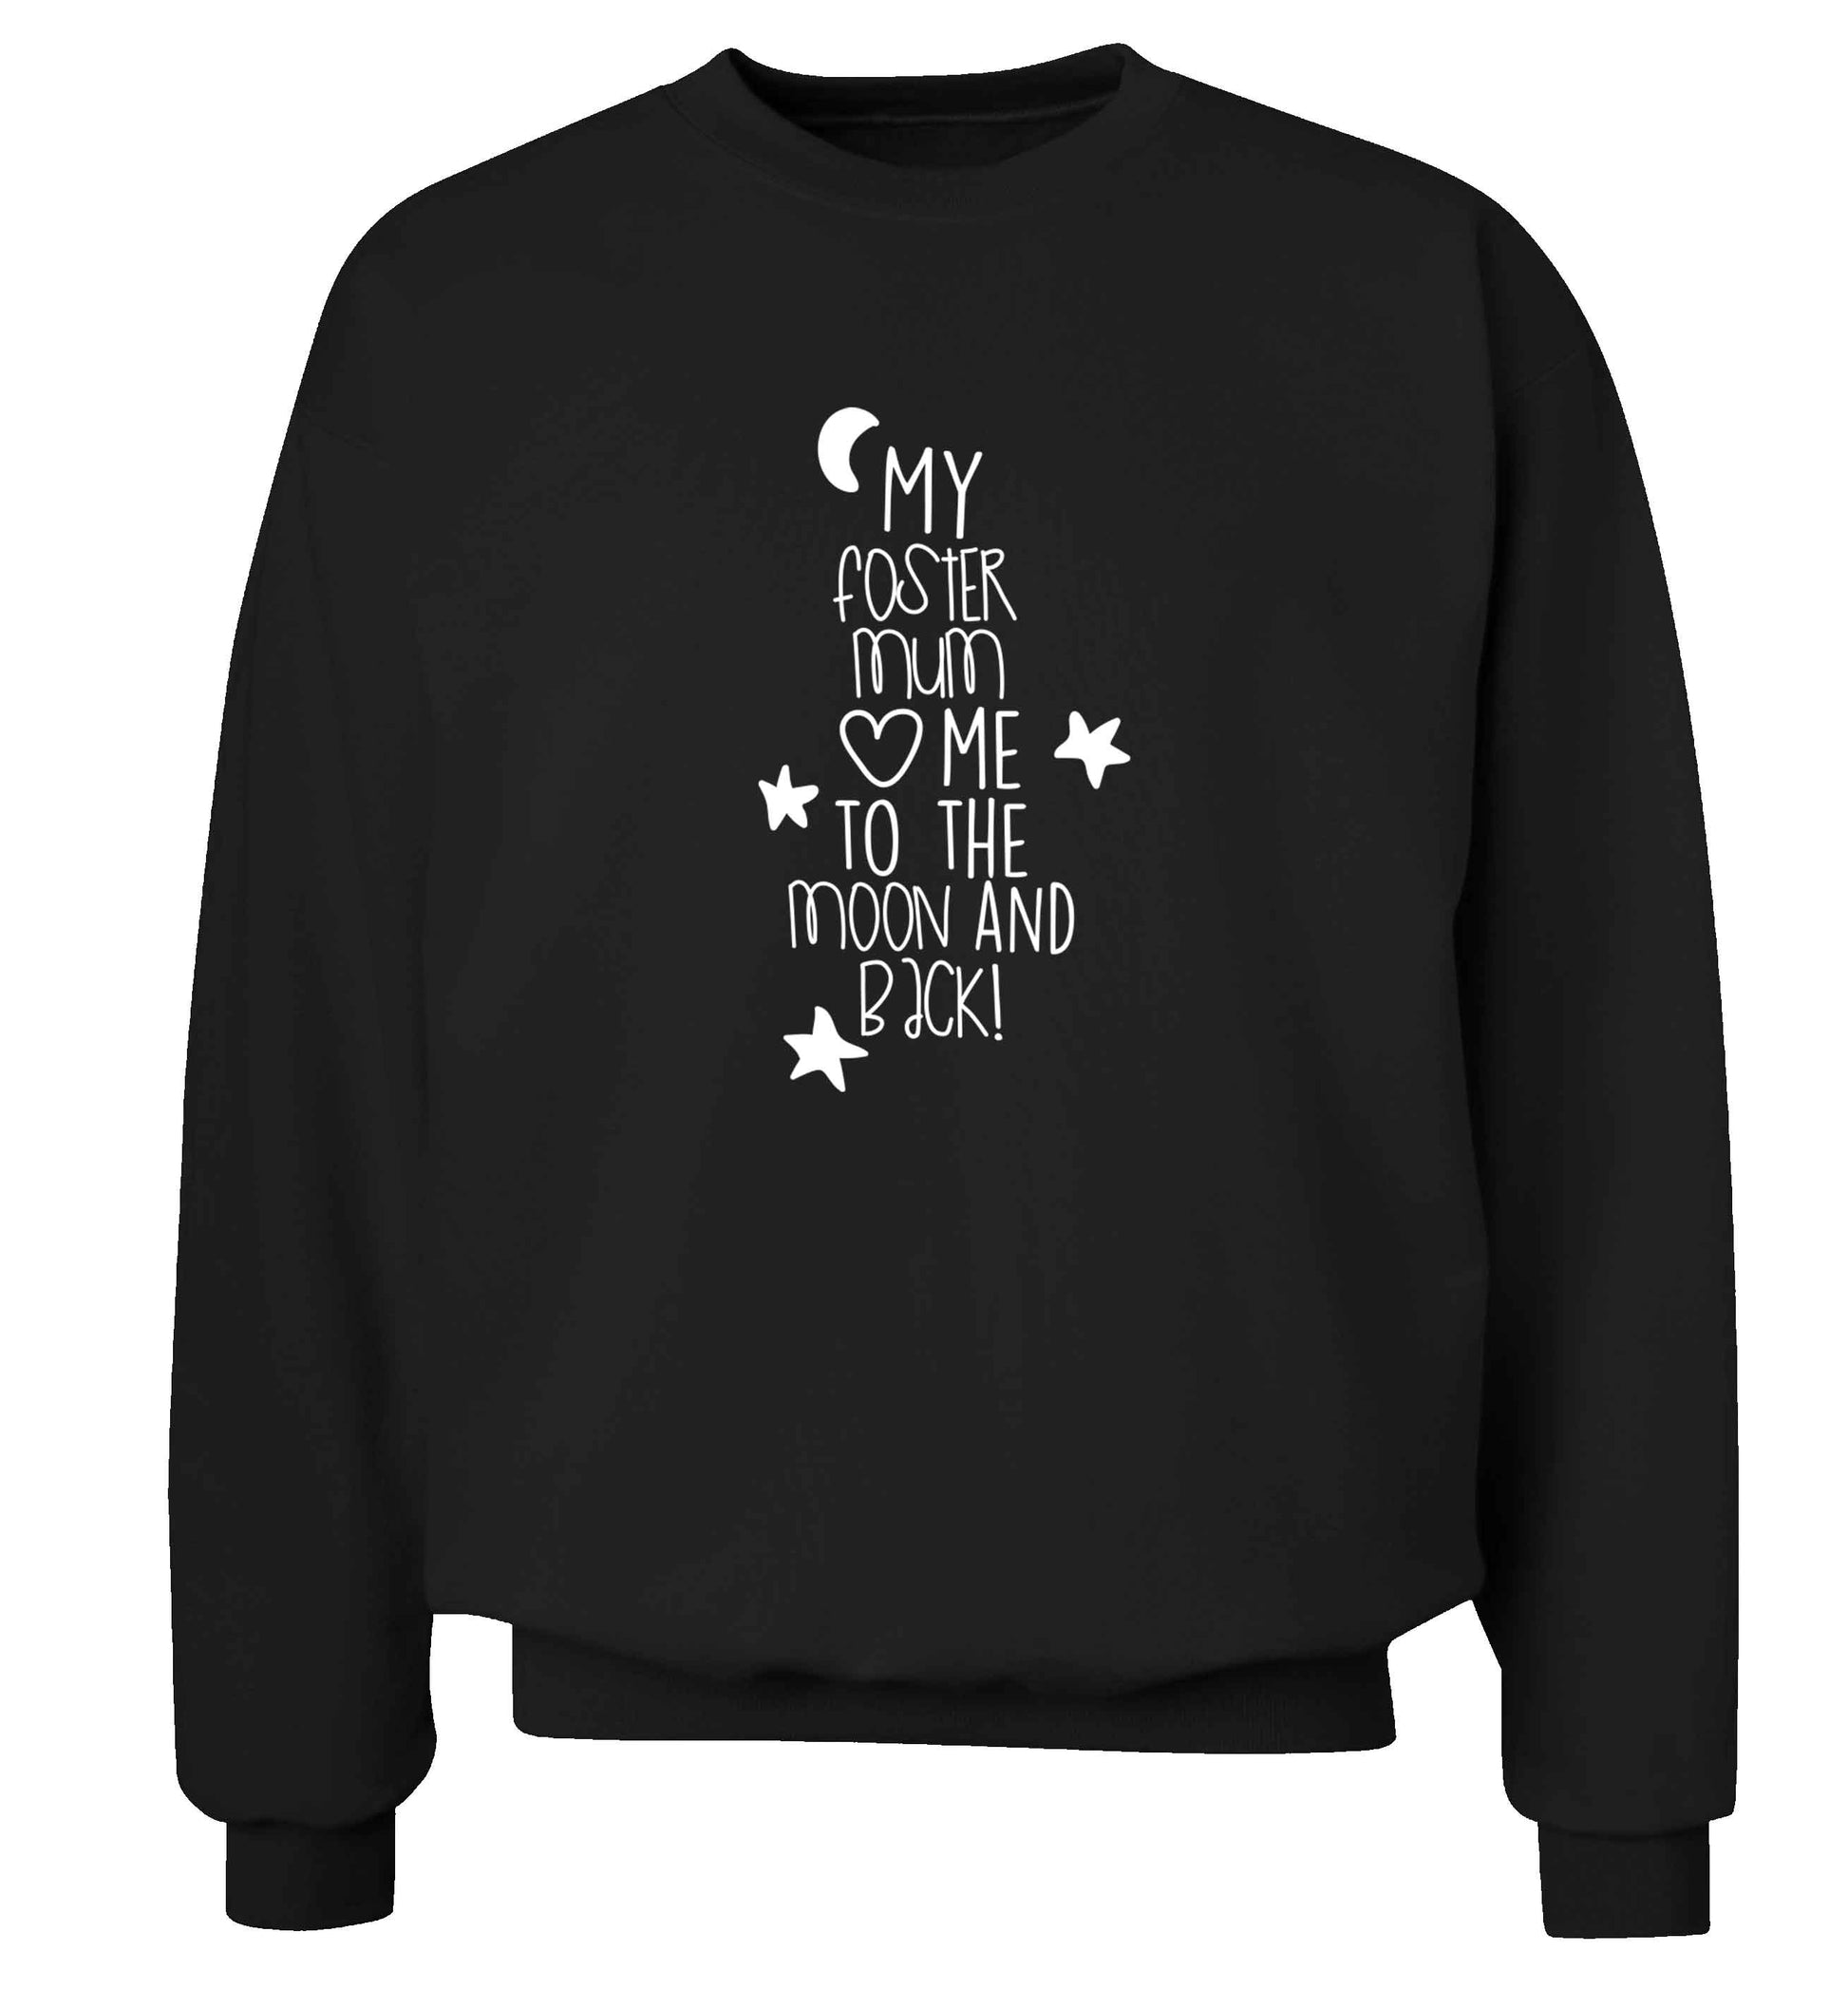 My foster mum loves me to the moon and back adult's unisex black sweater 2XL